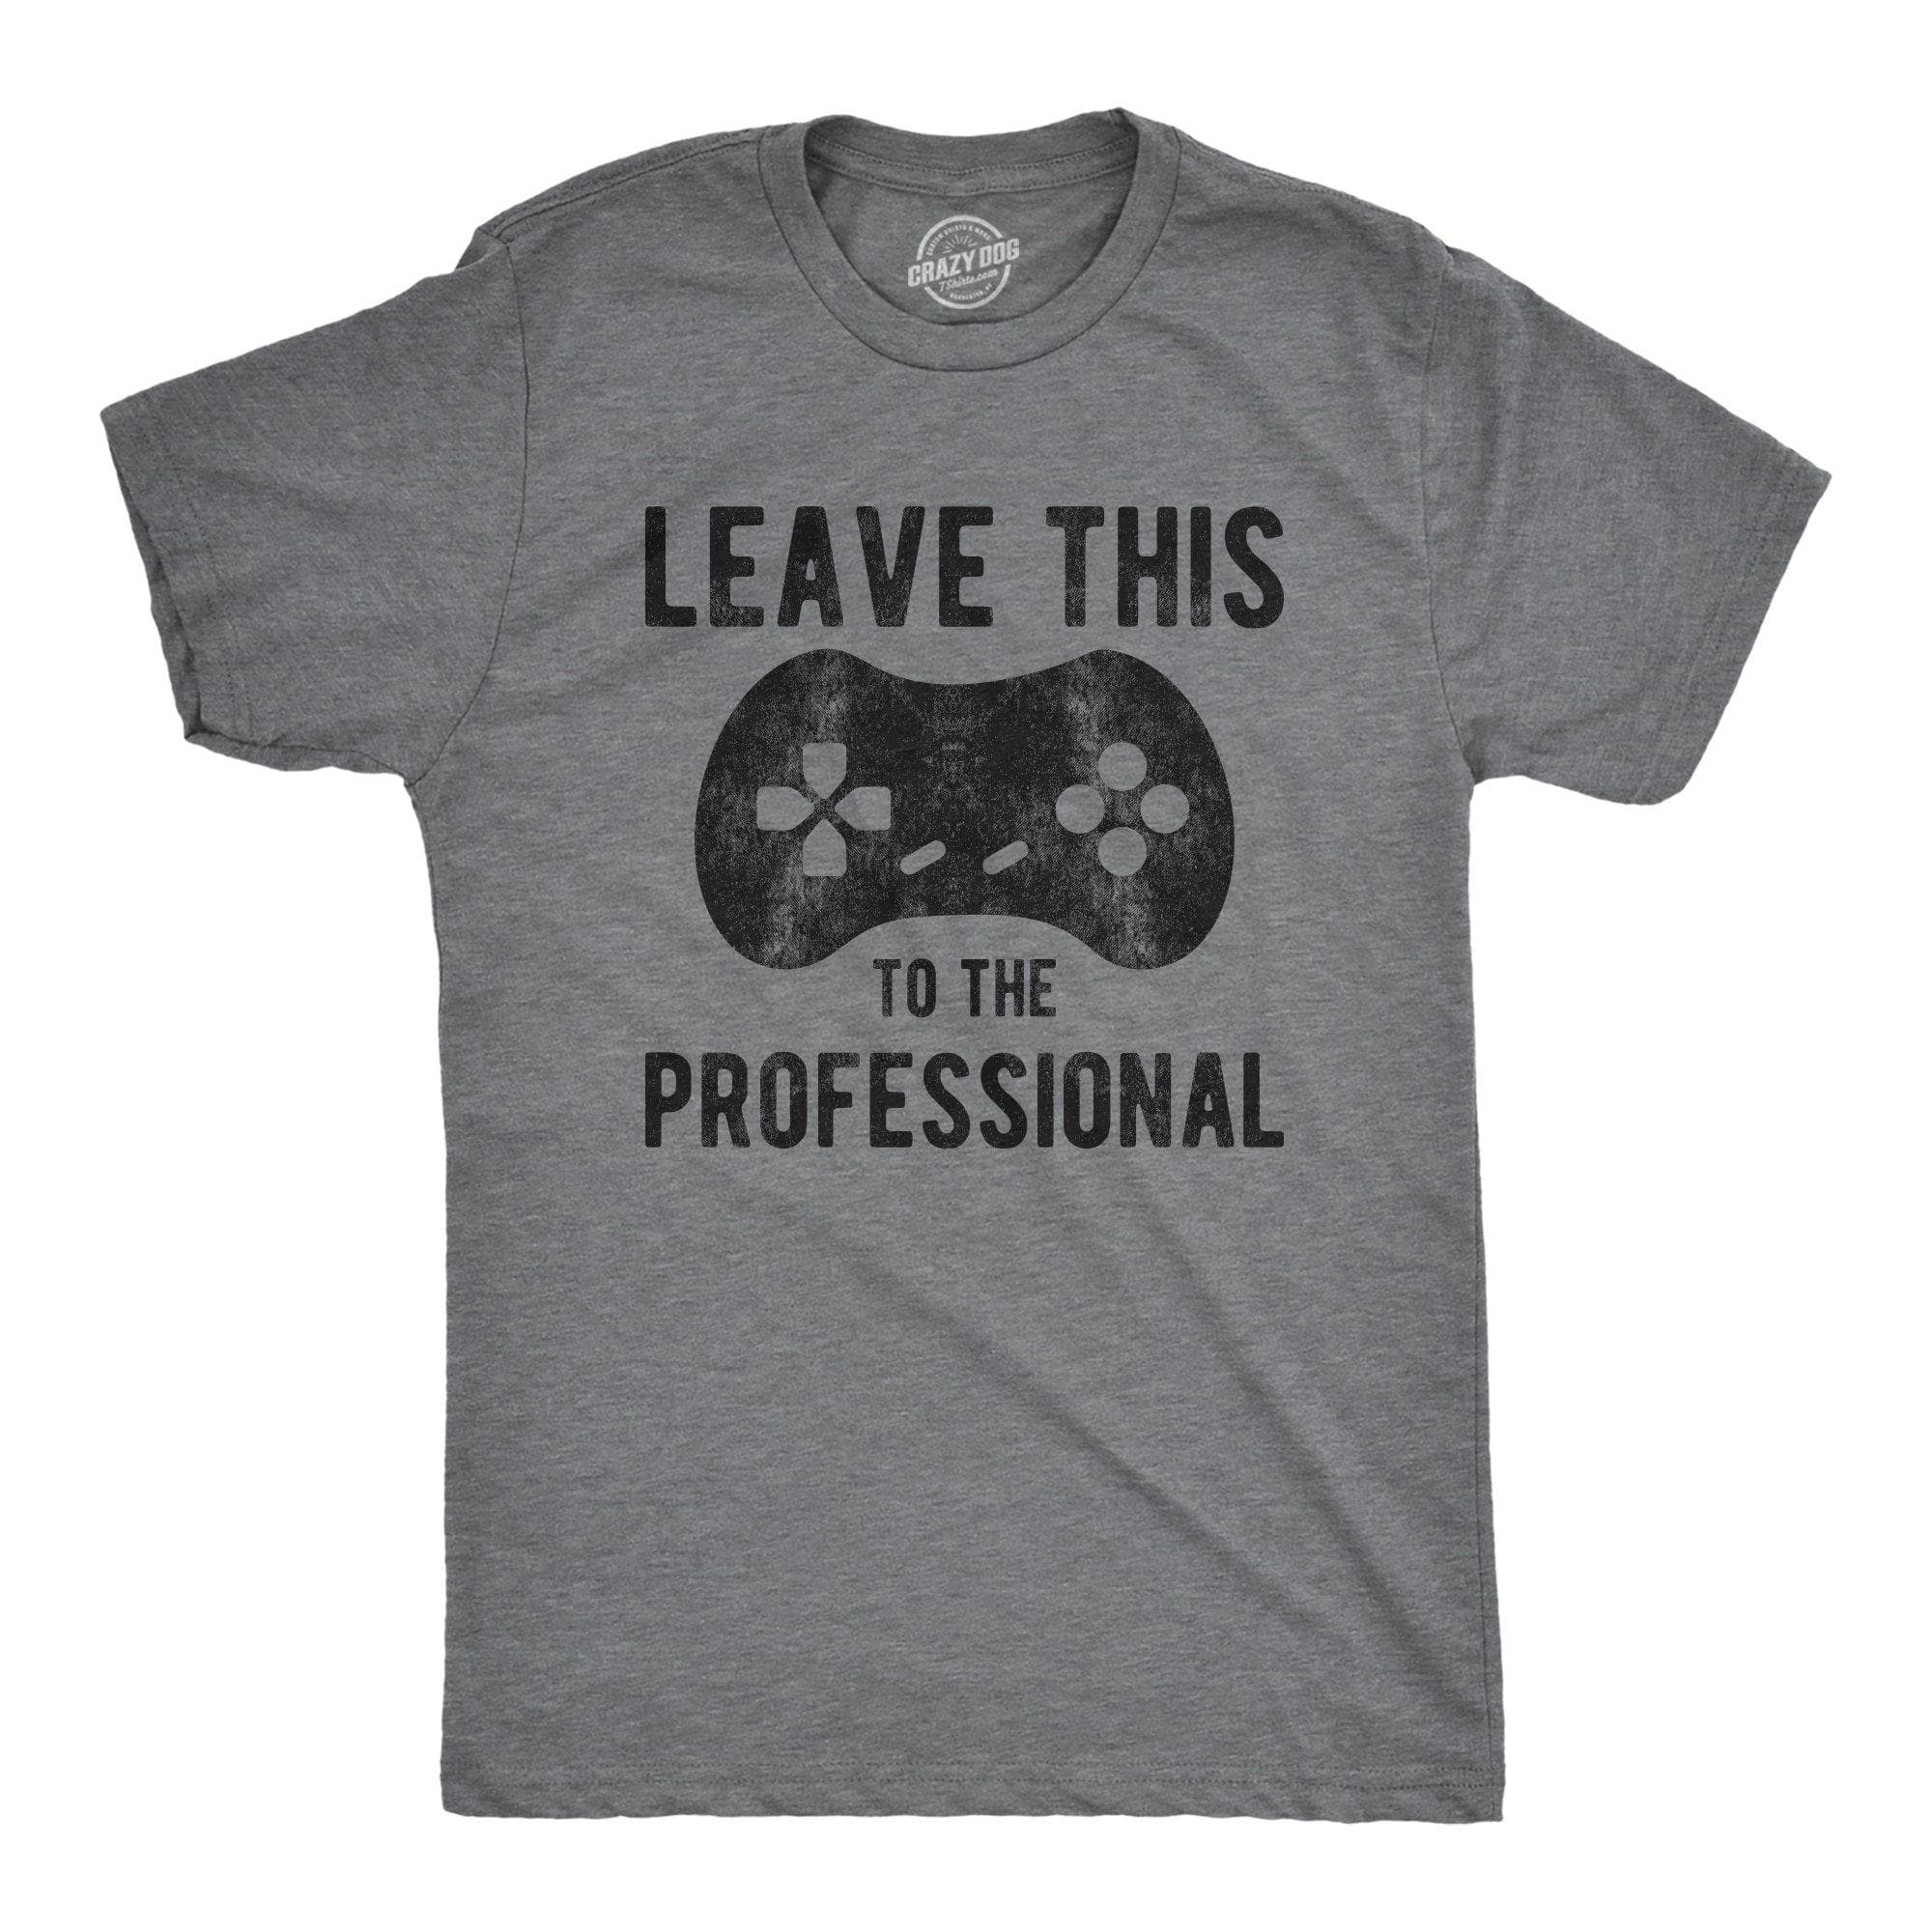 Leave This To The Professional Men's Tshirt - Crazy Dog T-Shirts